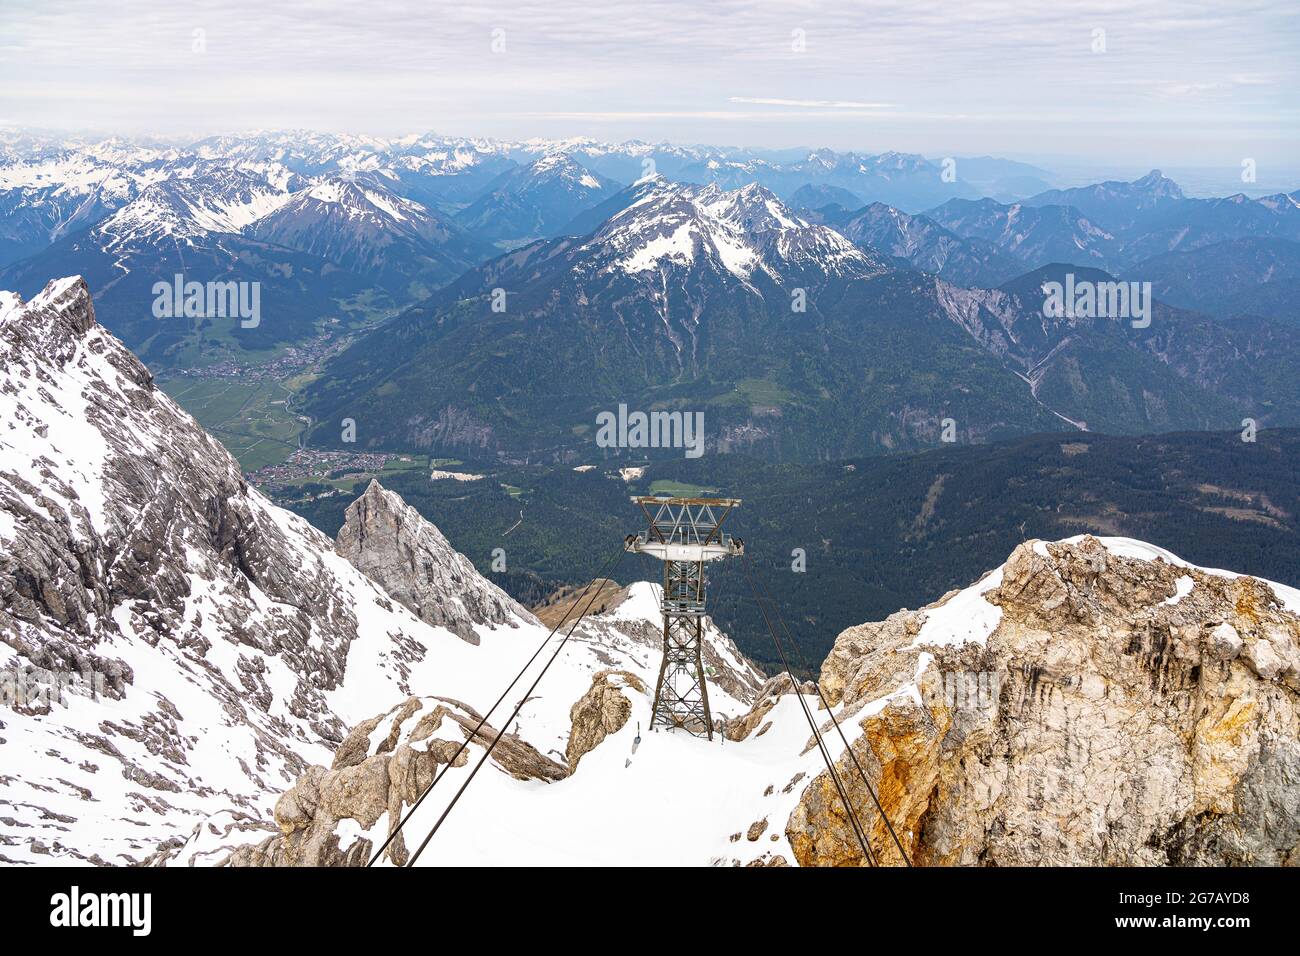 View from Zugspitz summit on cable car and surrounding snow-covered mountain landscape, Grainau, Upper Bavaria, Germany Stock Photo